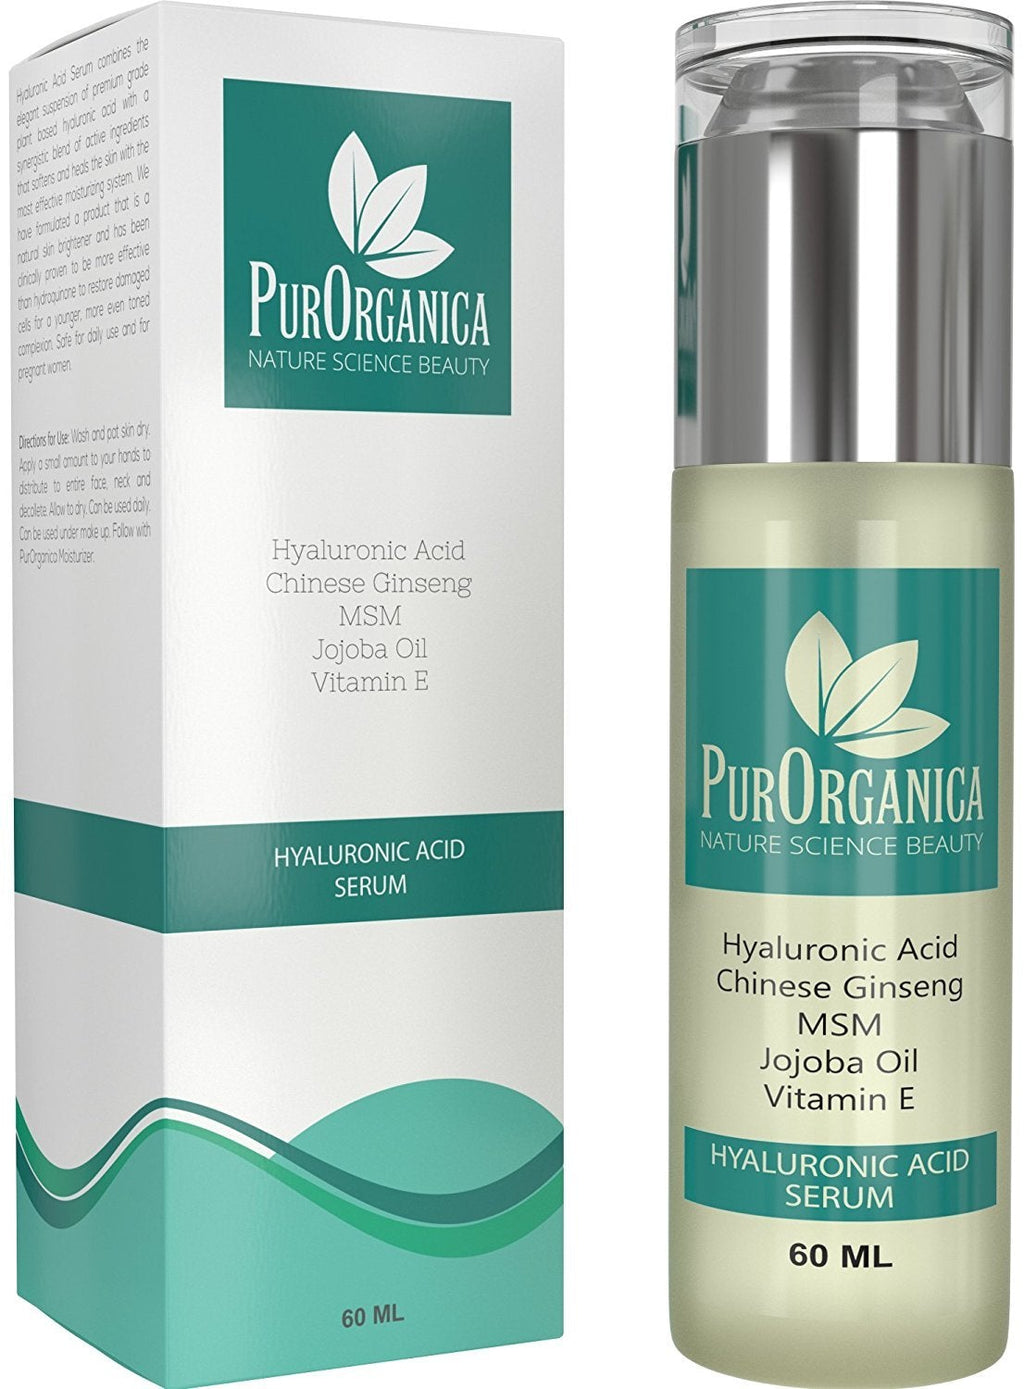 [Australia] - PurOrganica Hyaluronic Acid Face Serum - Huge 60 ML Bottle - The Best Anti Ageing & Anti Wrinkle Serum - This Premium Organic Serum Will Plump, Hydrate & Brighten Skin While Filling In Those Fine Lines & Wrinkles - It Works or Your Money Back Guarantee 